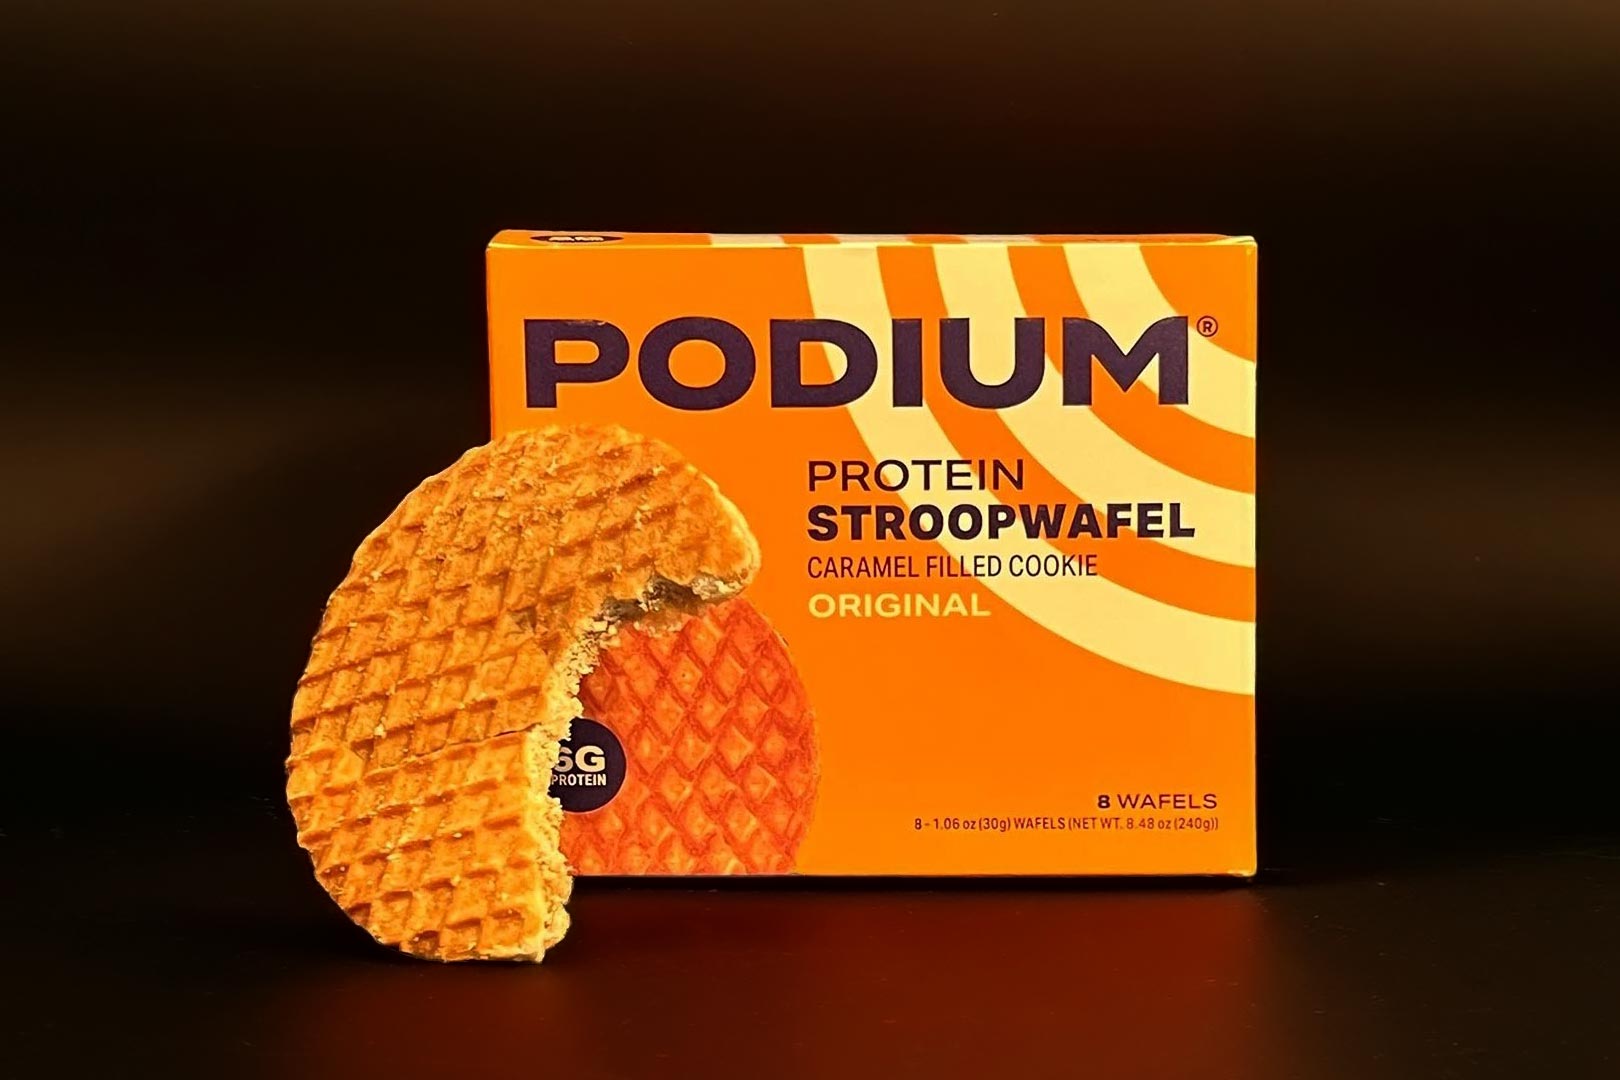 Podium makes its first protein snack in an incredibly unique format